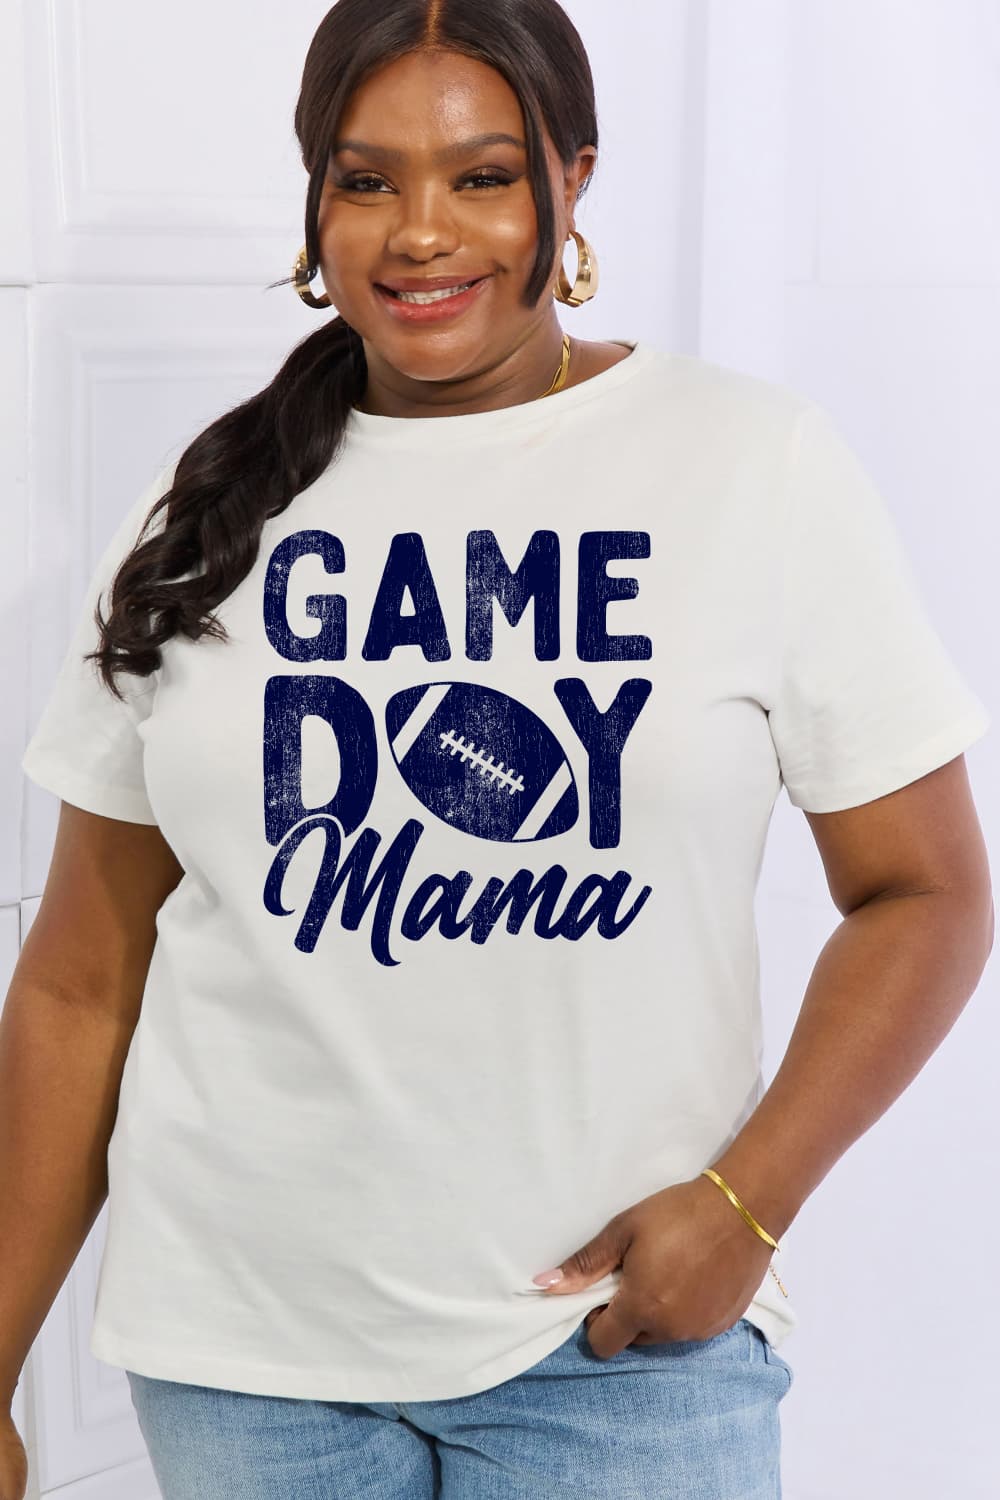 Simply Love Full Size GAMEDAY MAMA Graphic Cotton Tee (2 Colors)  Krazy Heart Designs Boutique   